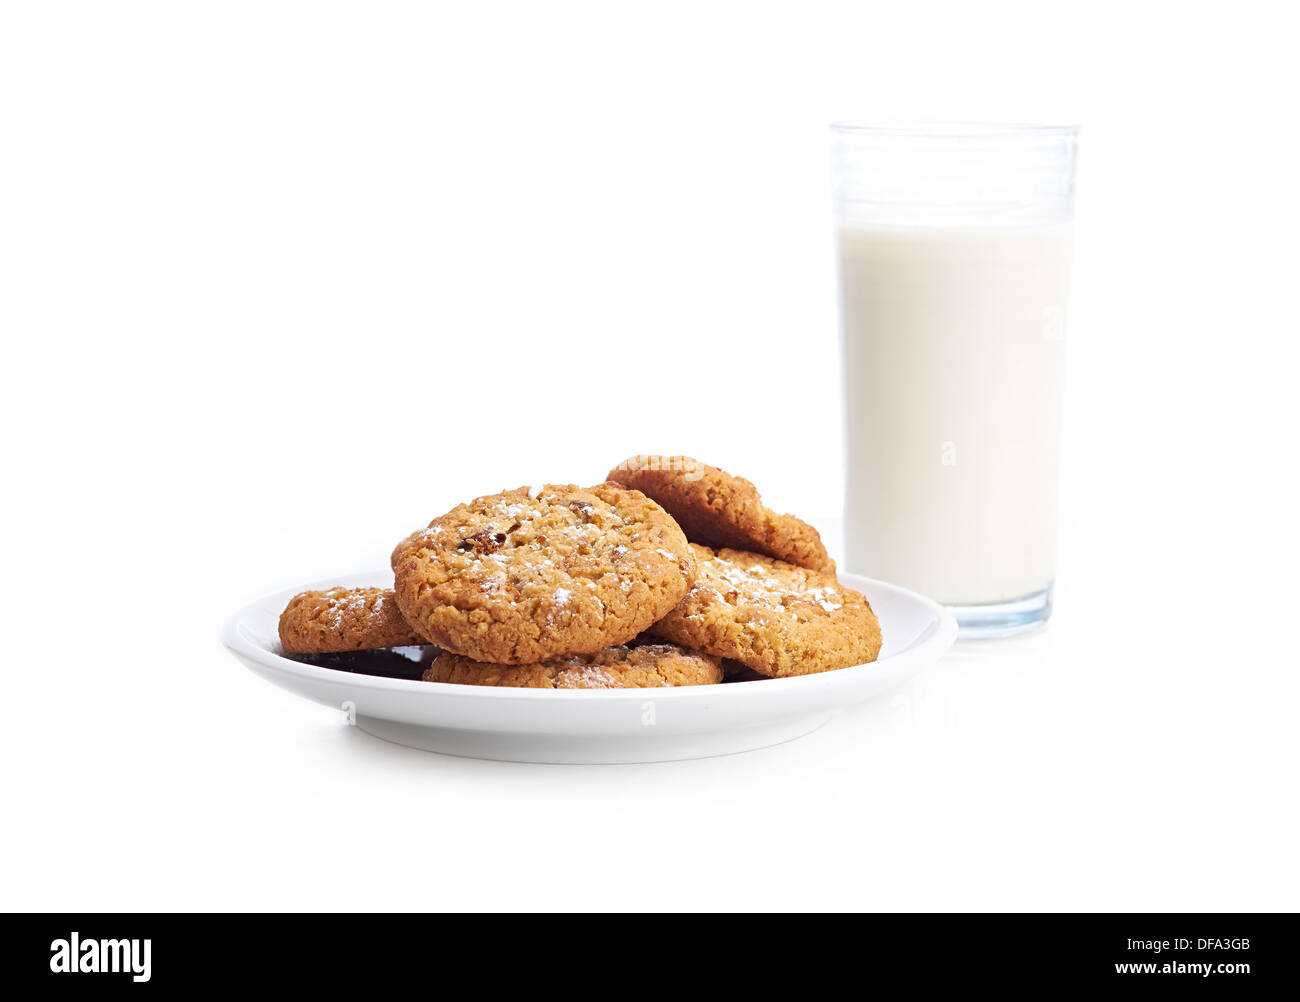 A pile of mixed cookies on a white plate and background with a glass of milk. Stock Photo